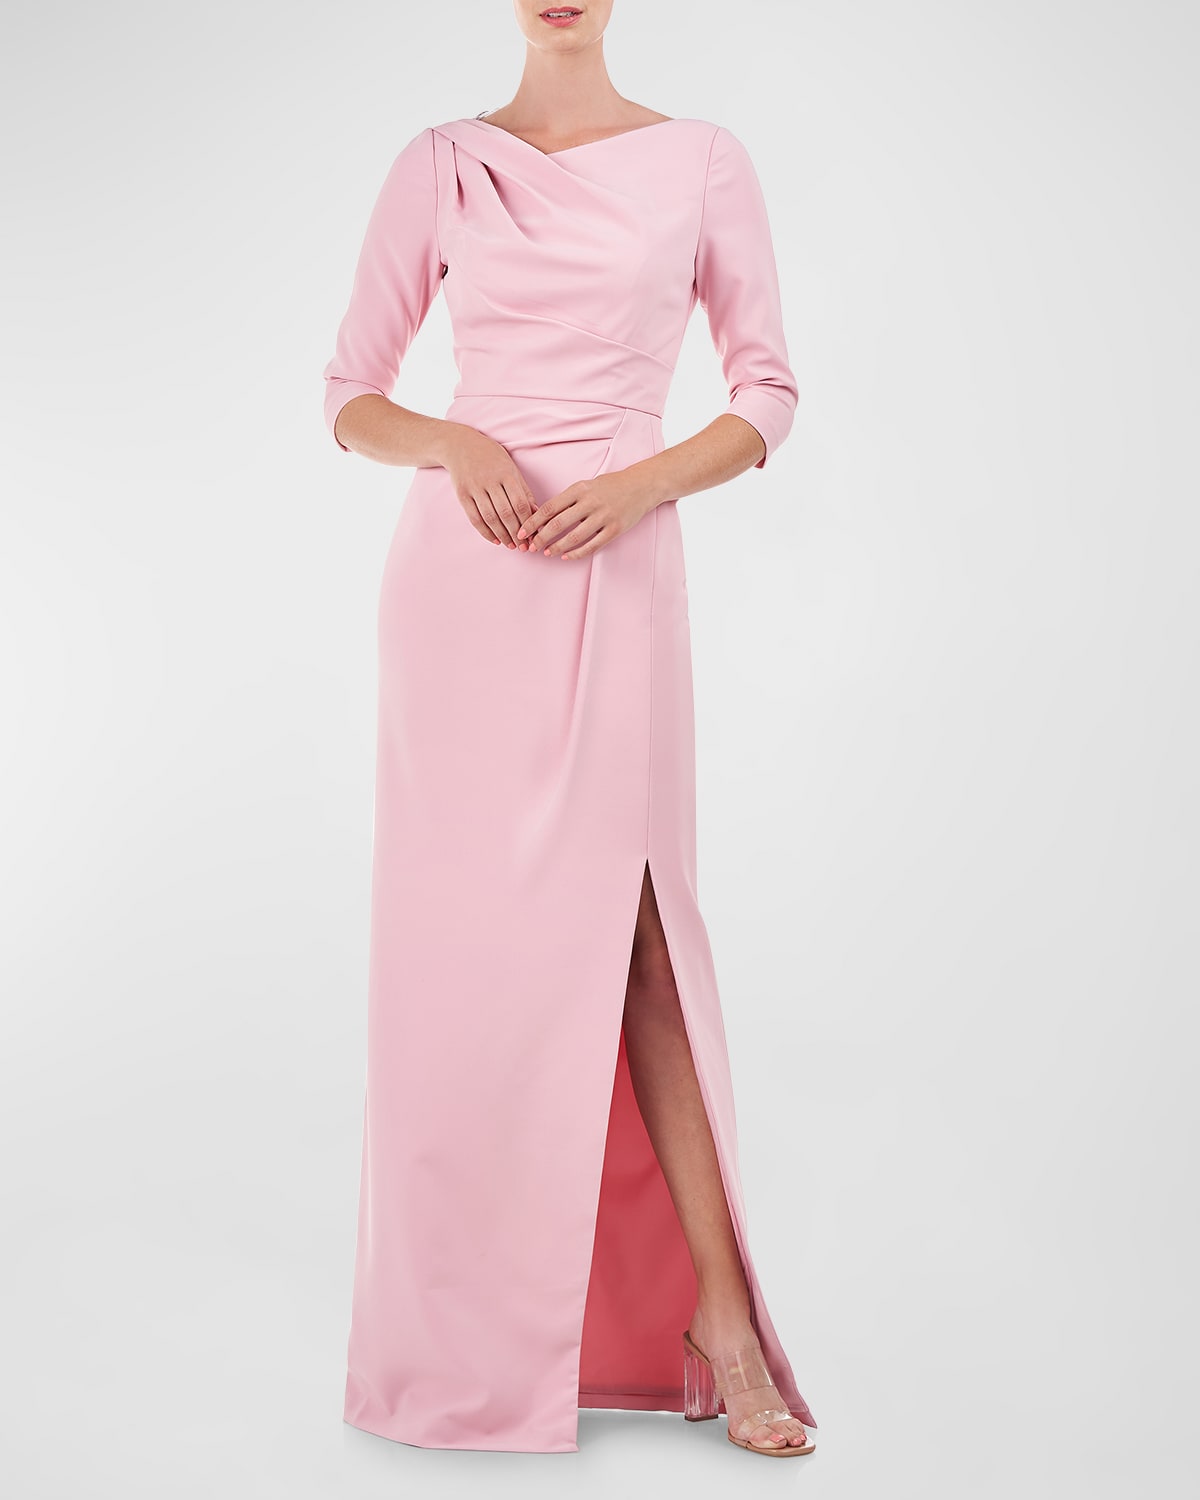 KAY UNGER MARGERITE PLEATED SIDE-SLIT COLUMN GOWN